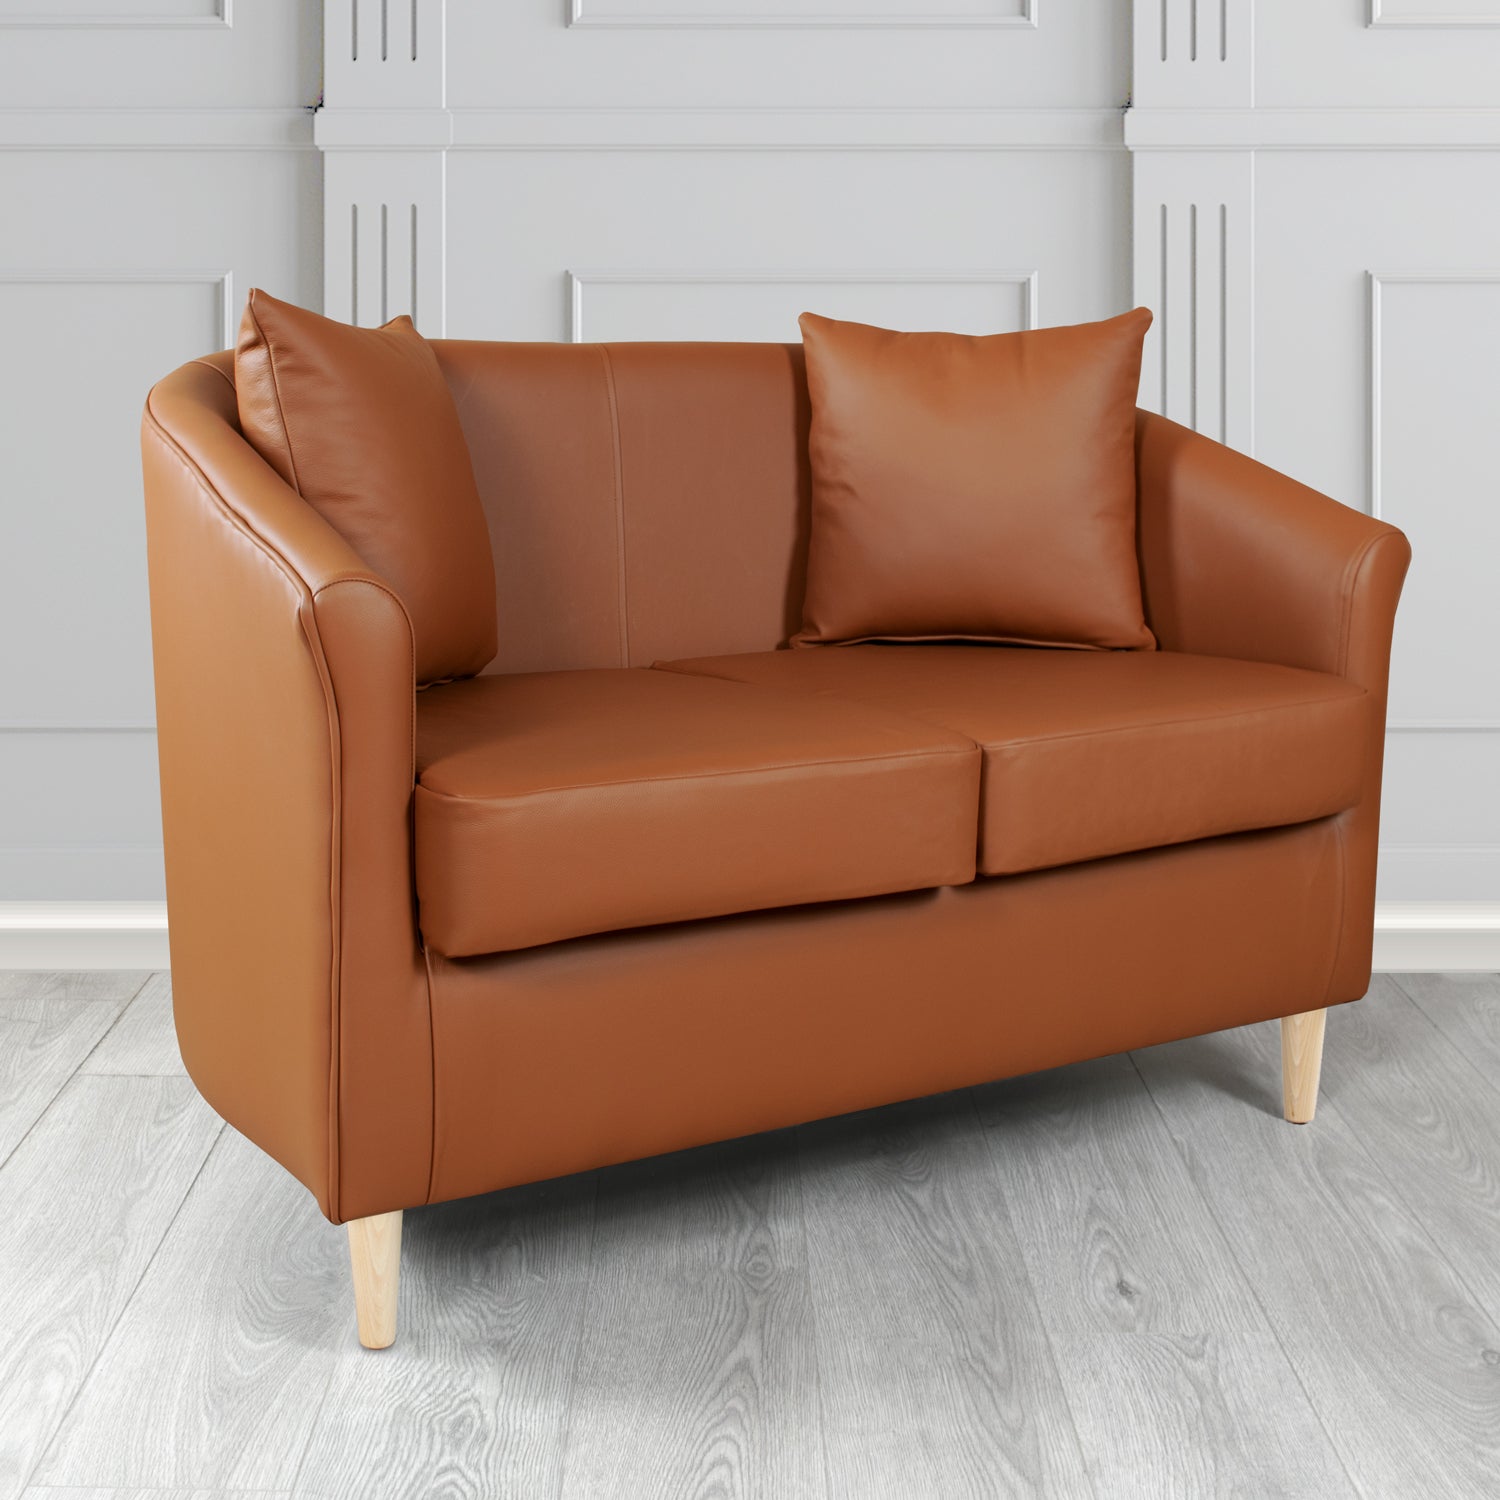 St Tropez Shelly Castagna Crib 5 Genuine Leather 2 Seater Tub Sofa with Scatter Cushions - The Tub Chair Shop